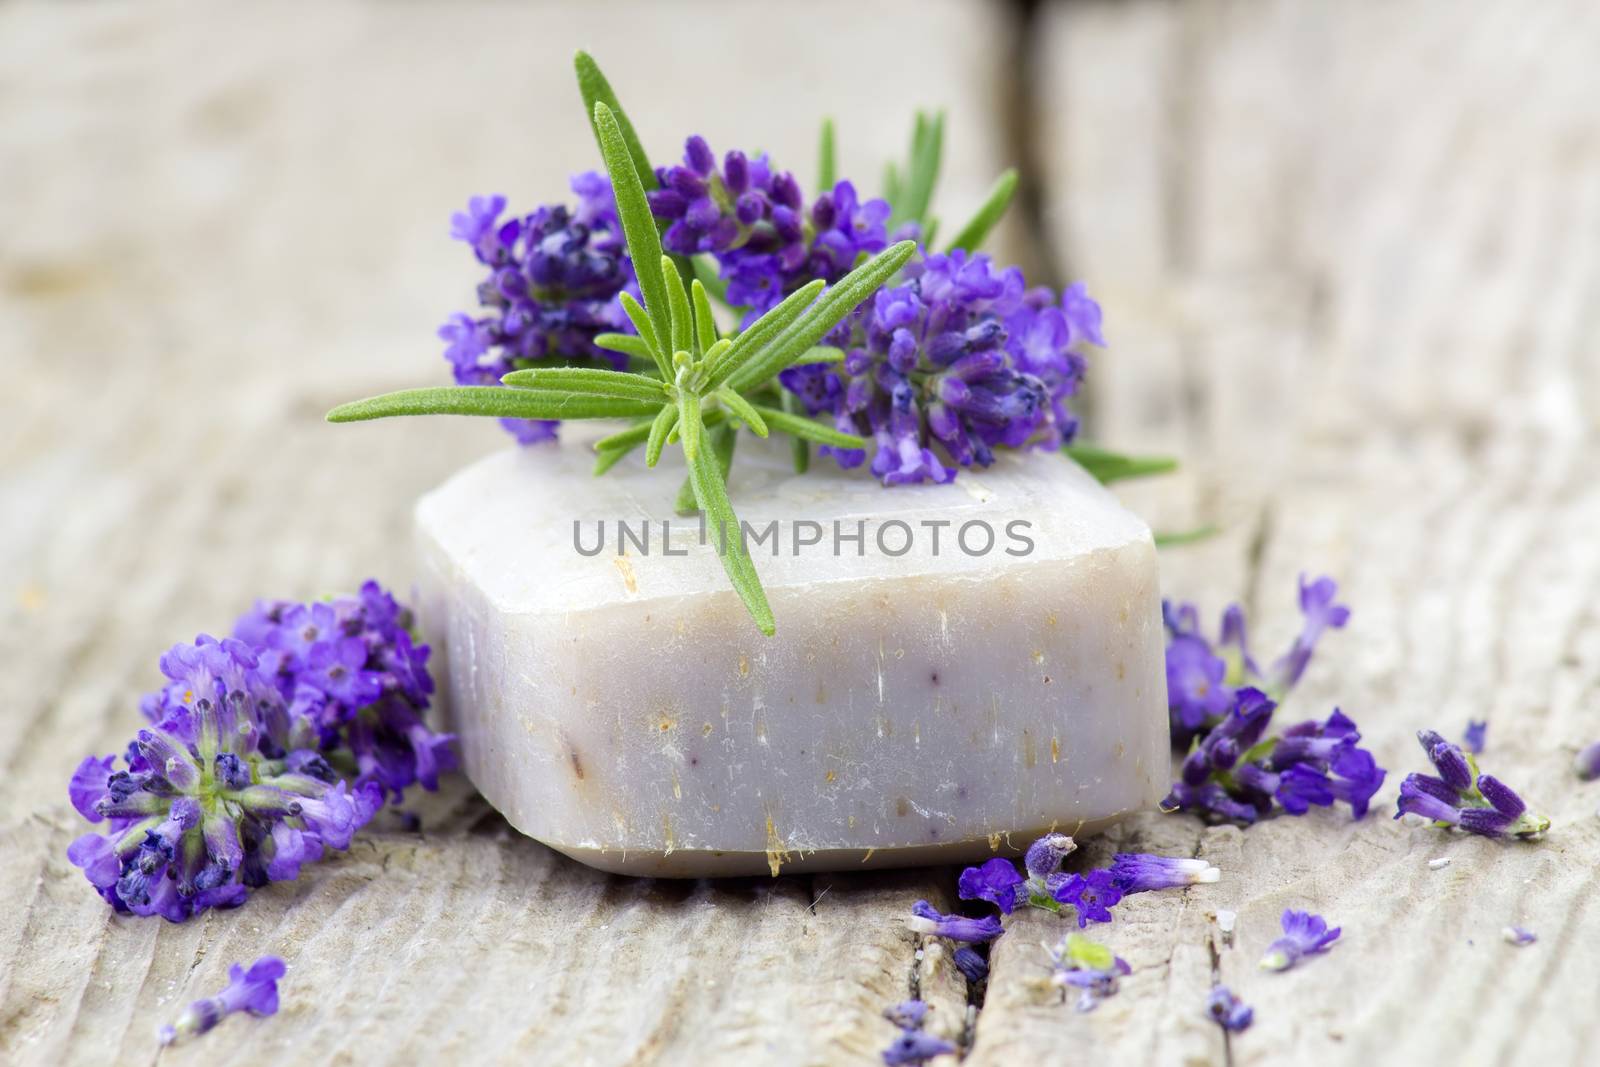 bar of natural soap and lavender flowers by miradrozdowski